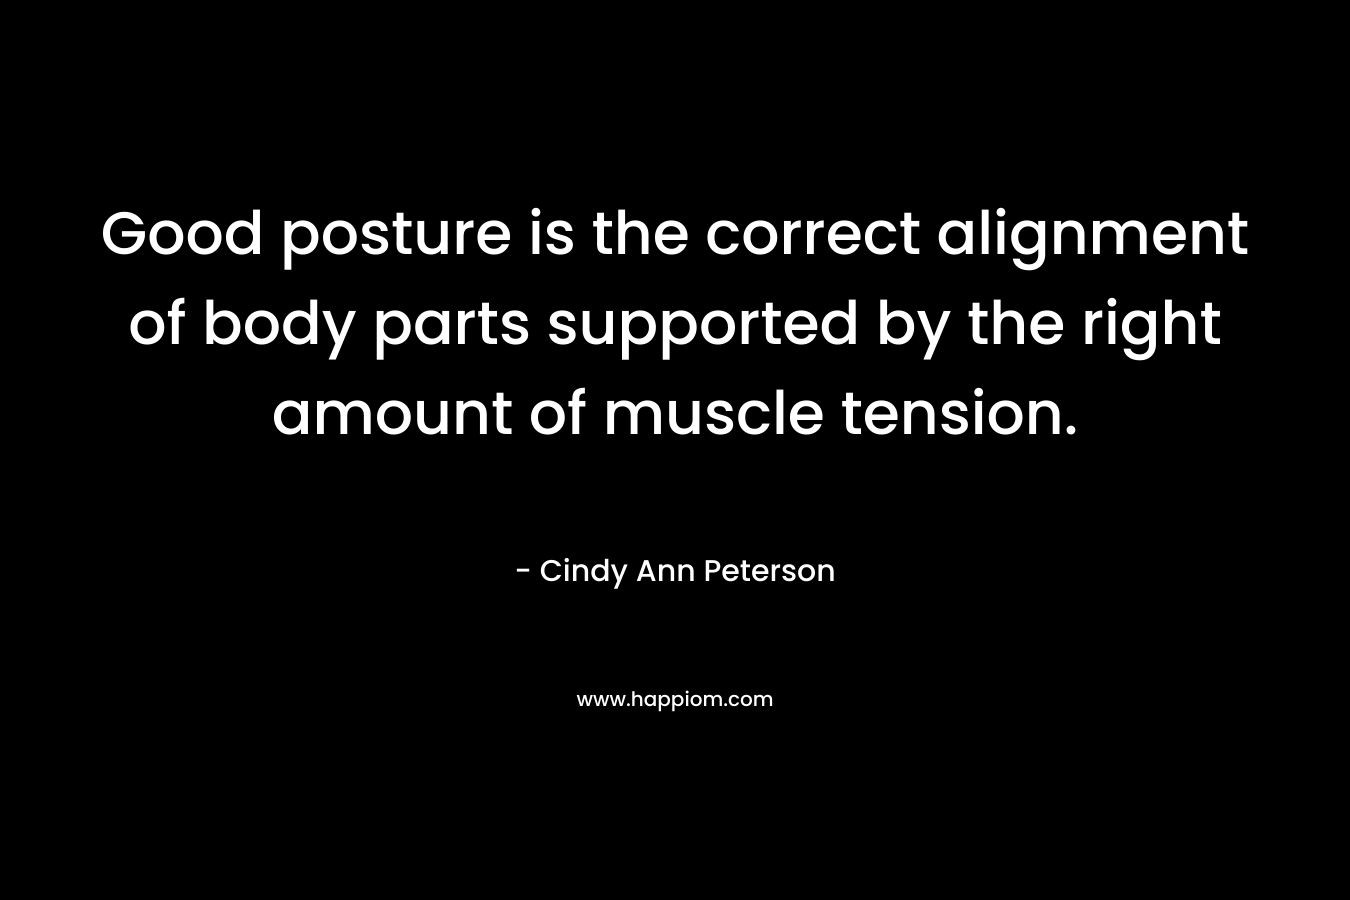 Good posture is the correct alignment of body parts supported by the right amount of muscle tension. – Cindy Ann Peterson